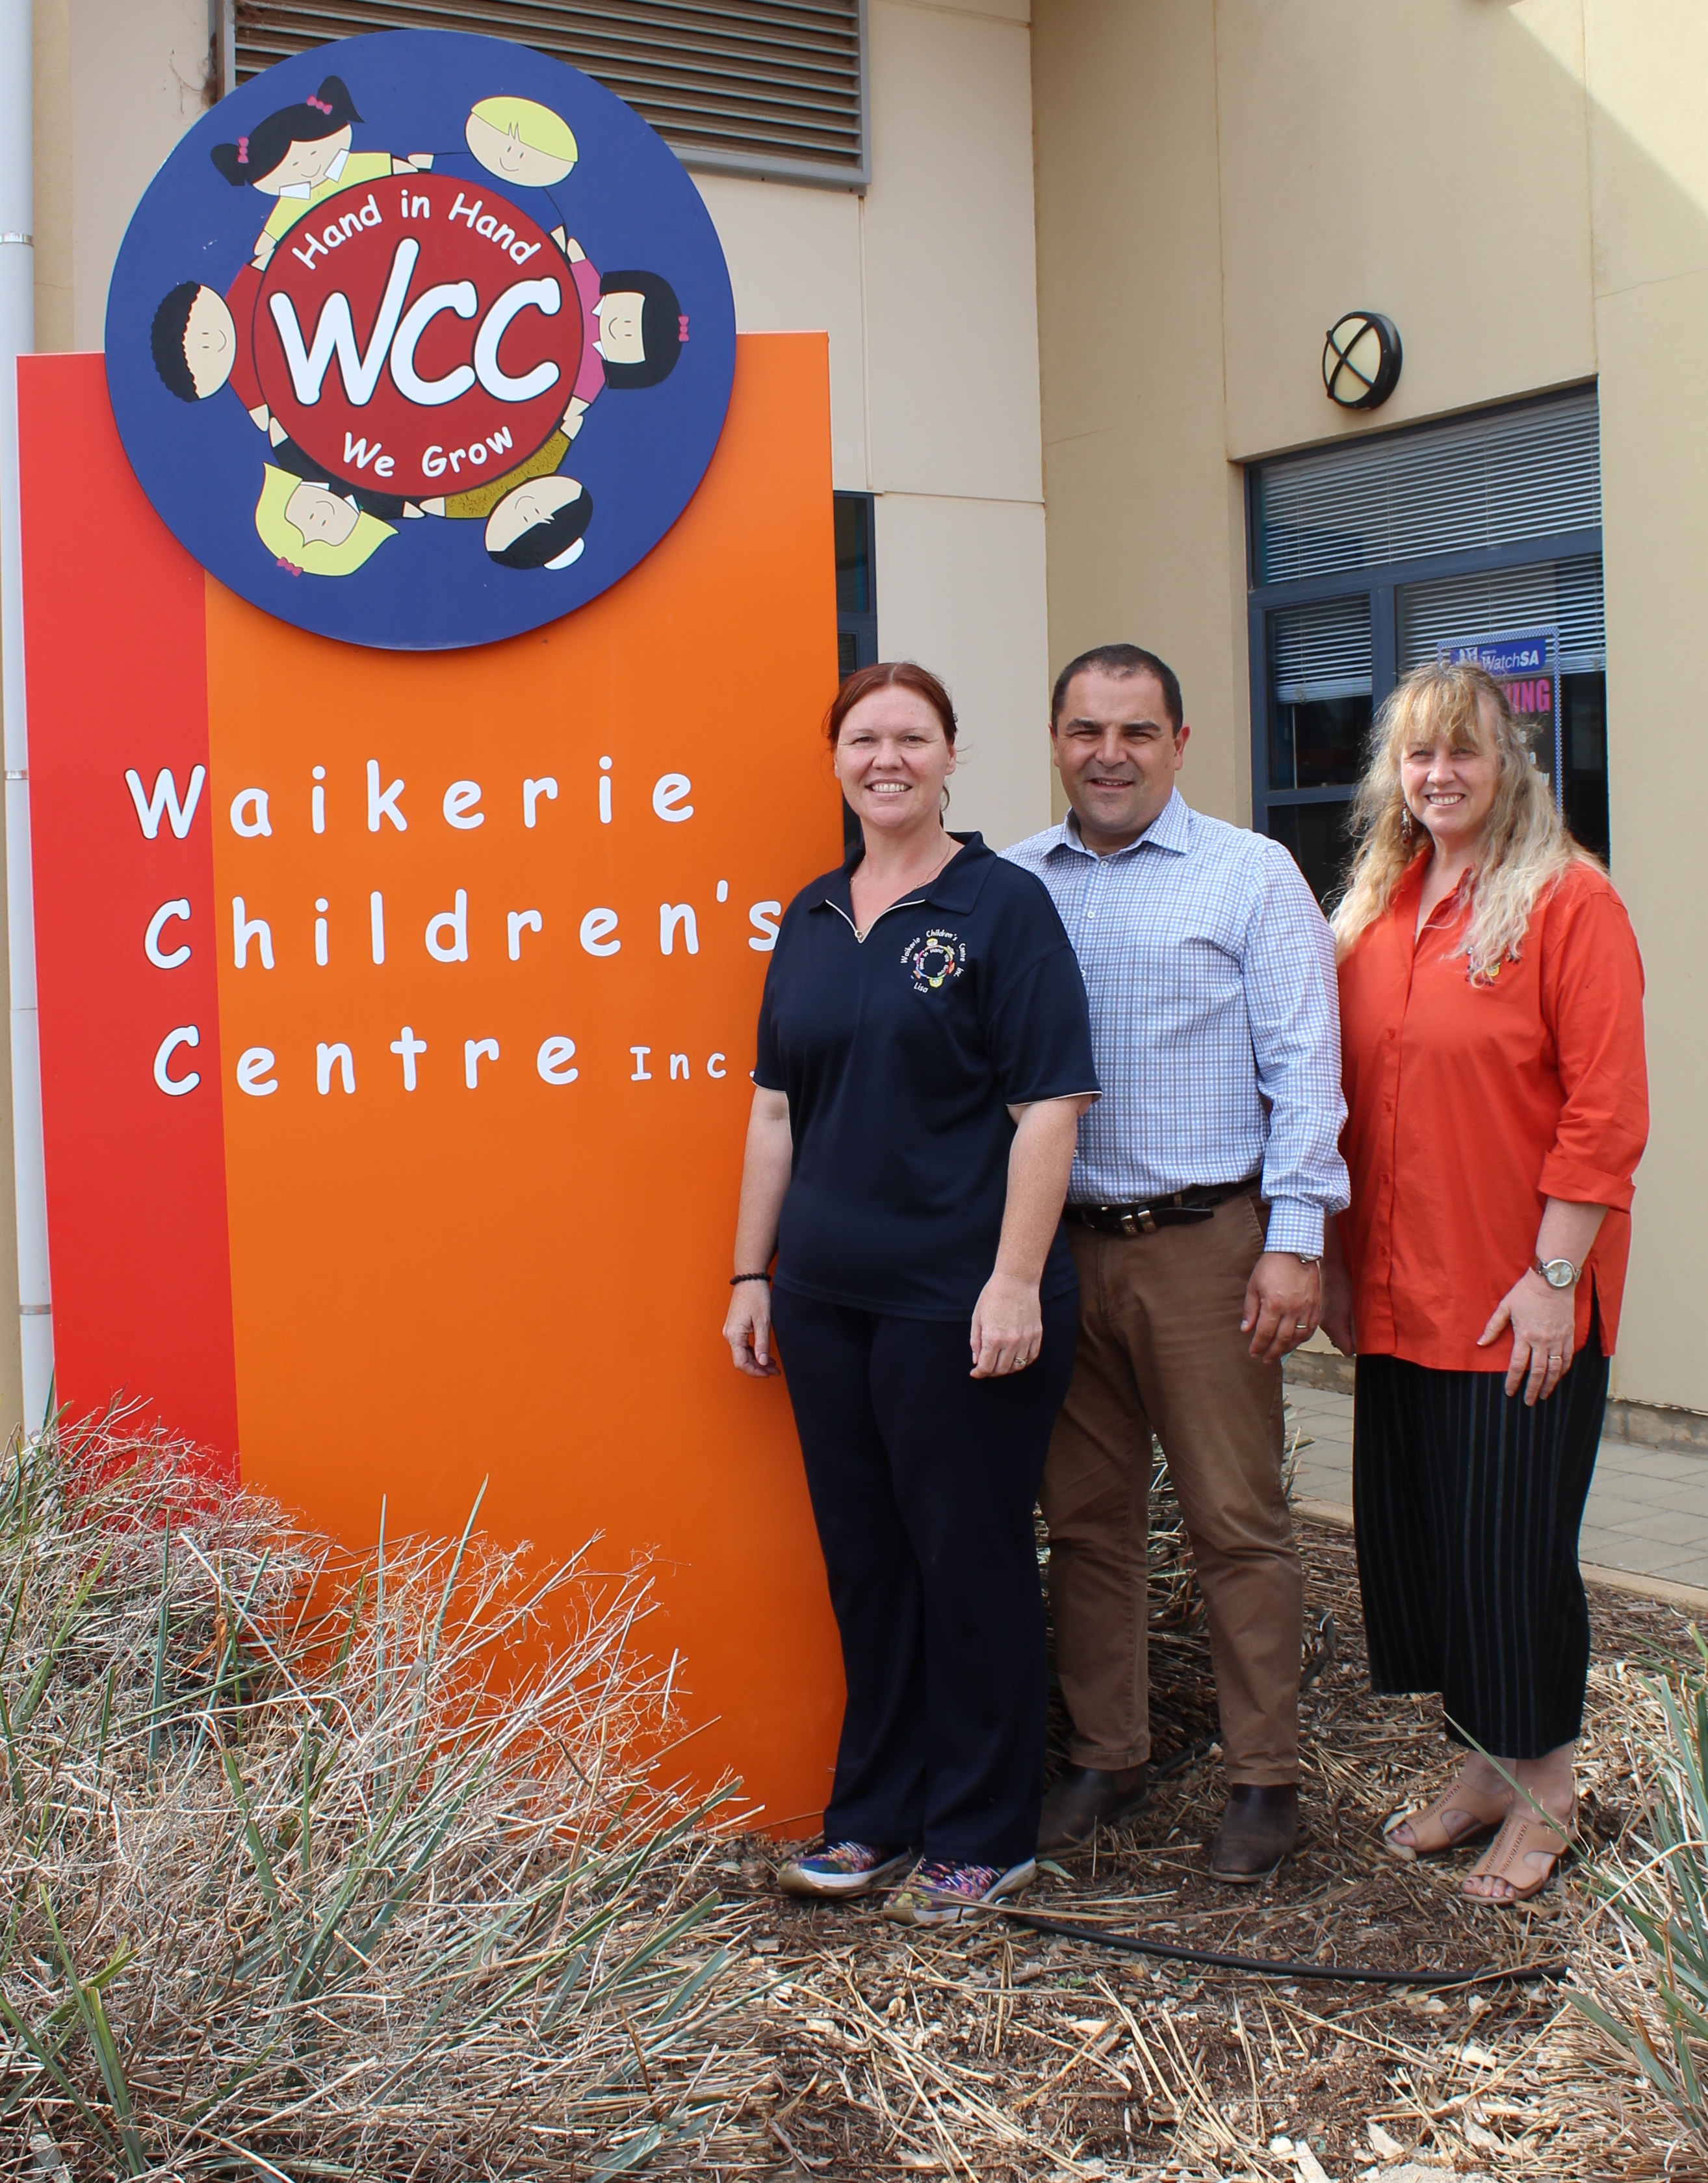 Improving child care services for Waikerie families